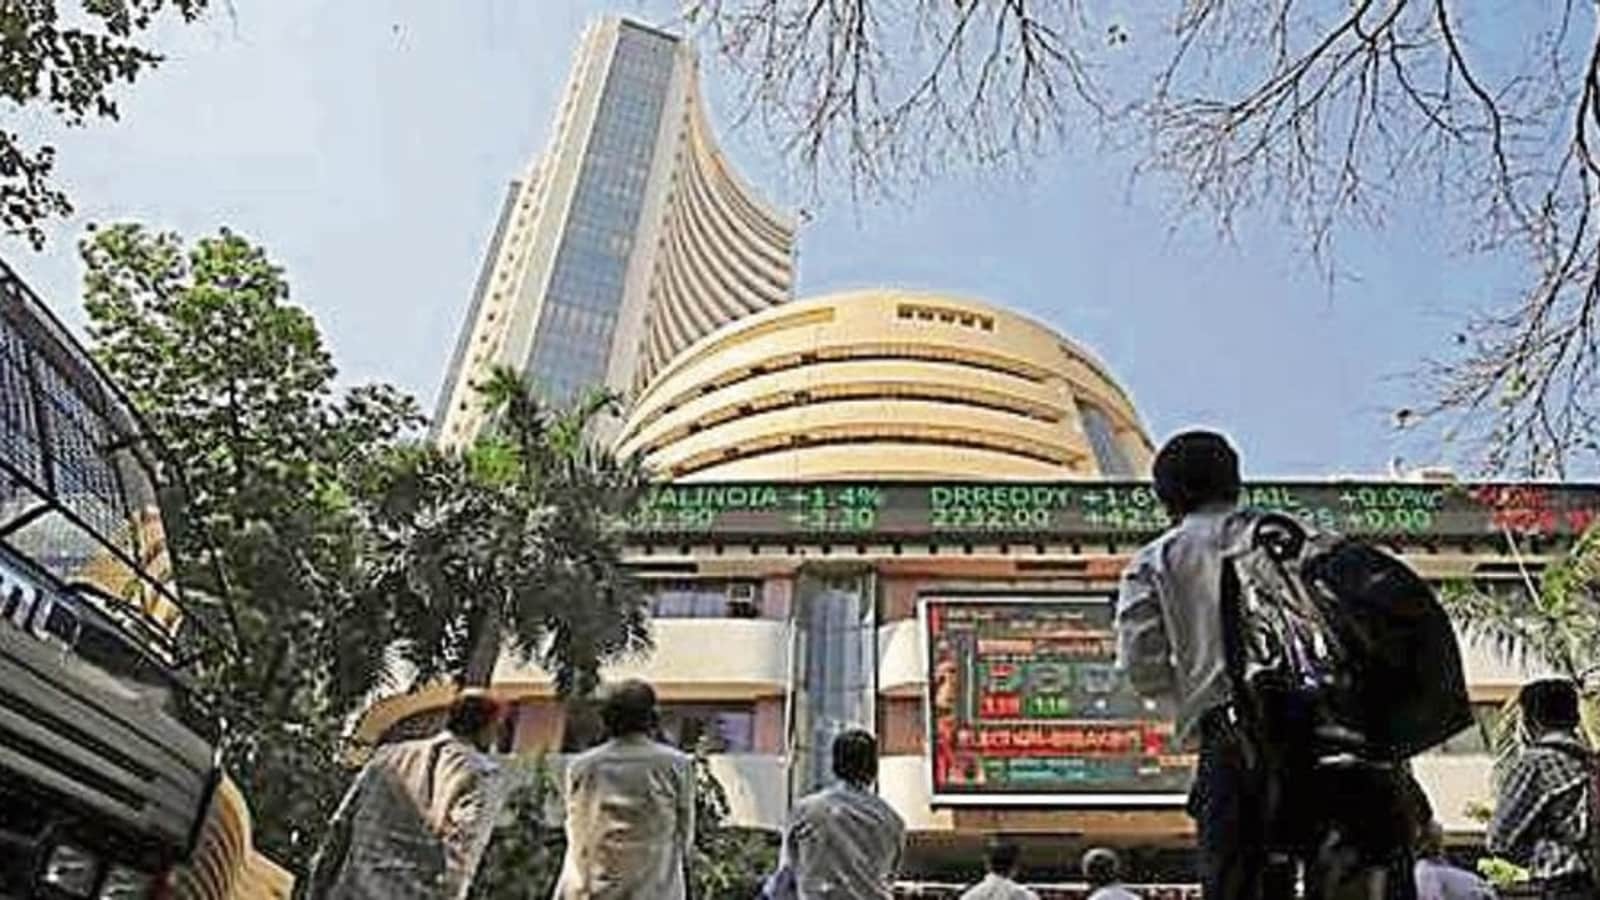 Sensex trades above 59,400 in opening session; Nifty at 17,700